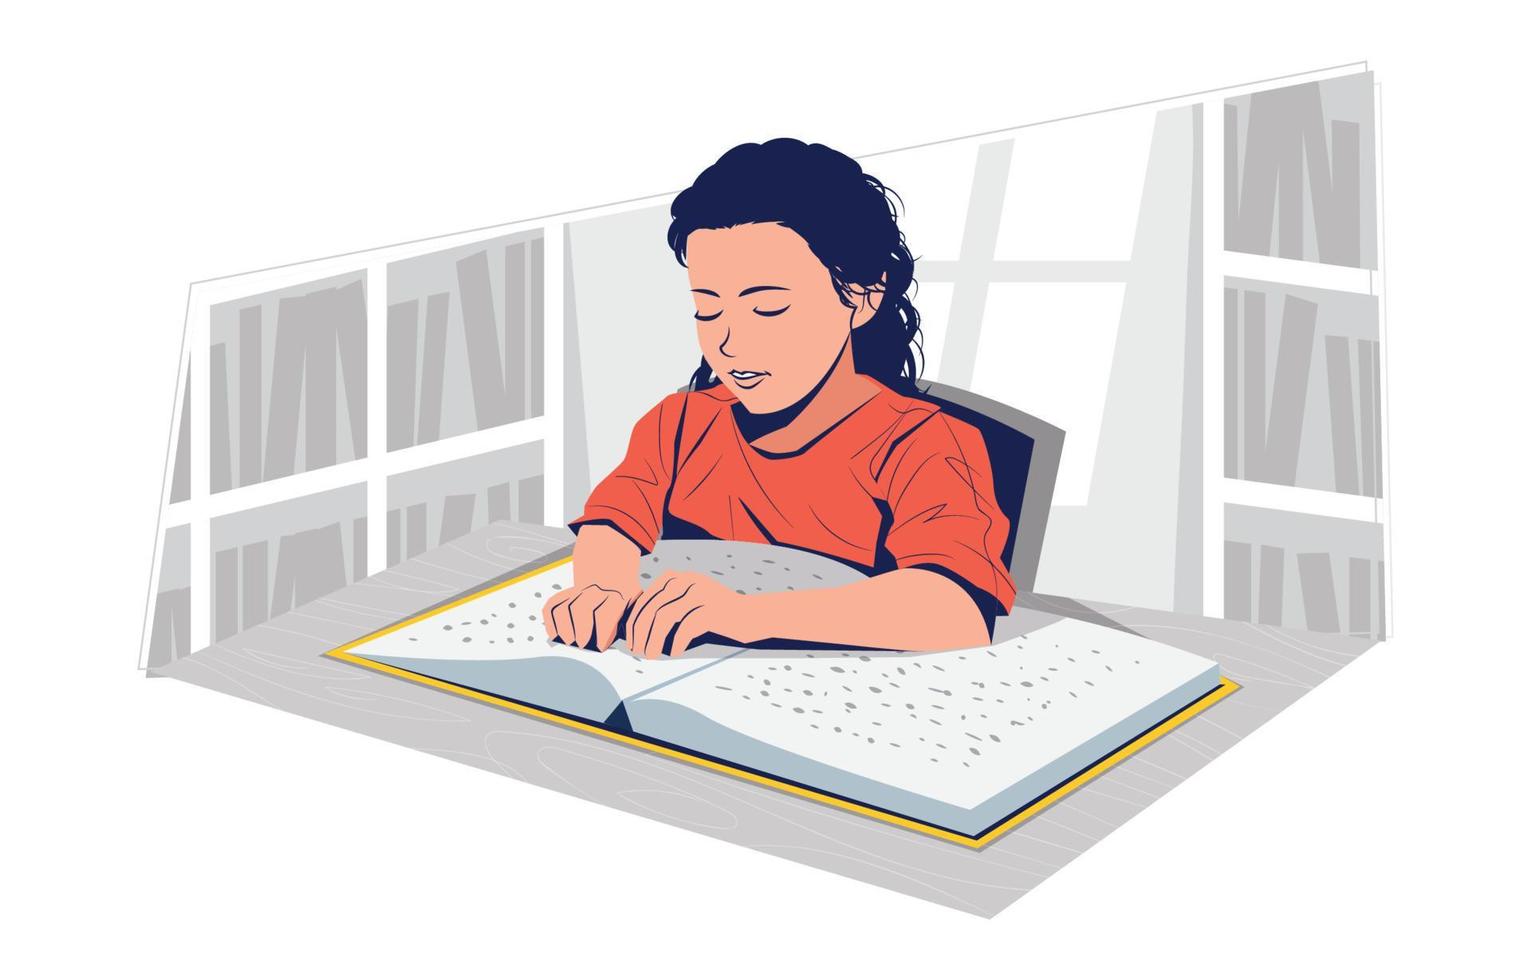 Disability Blind Girl Reading a Braille Book Concept vector